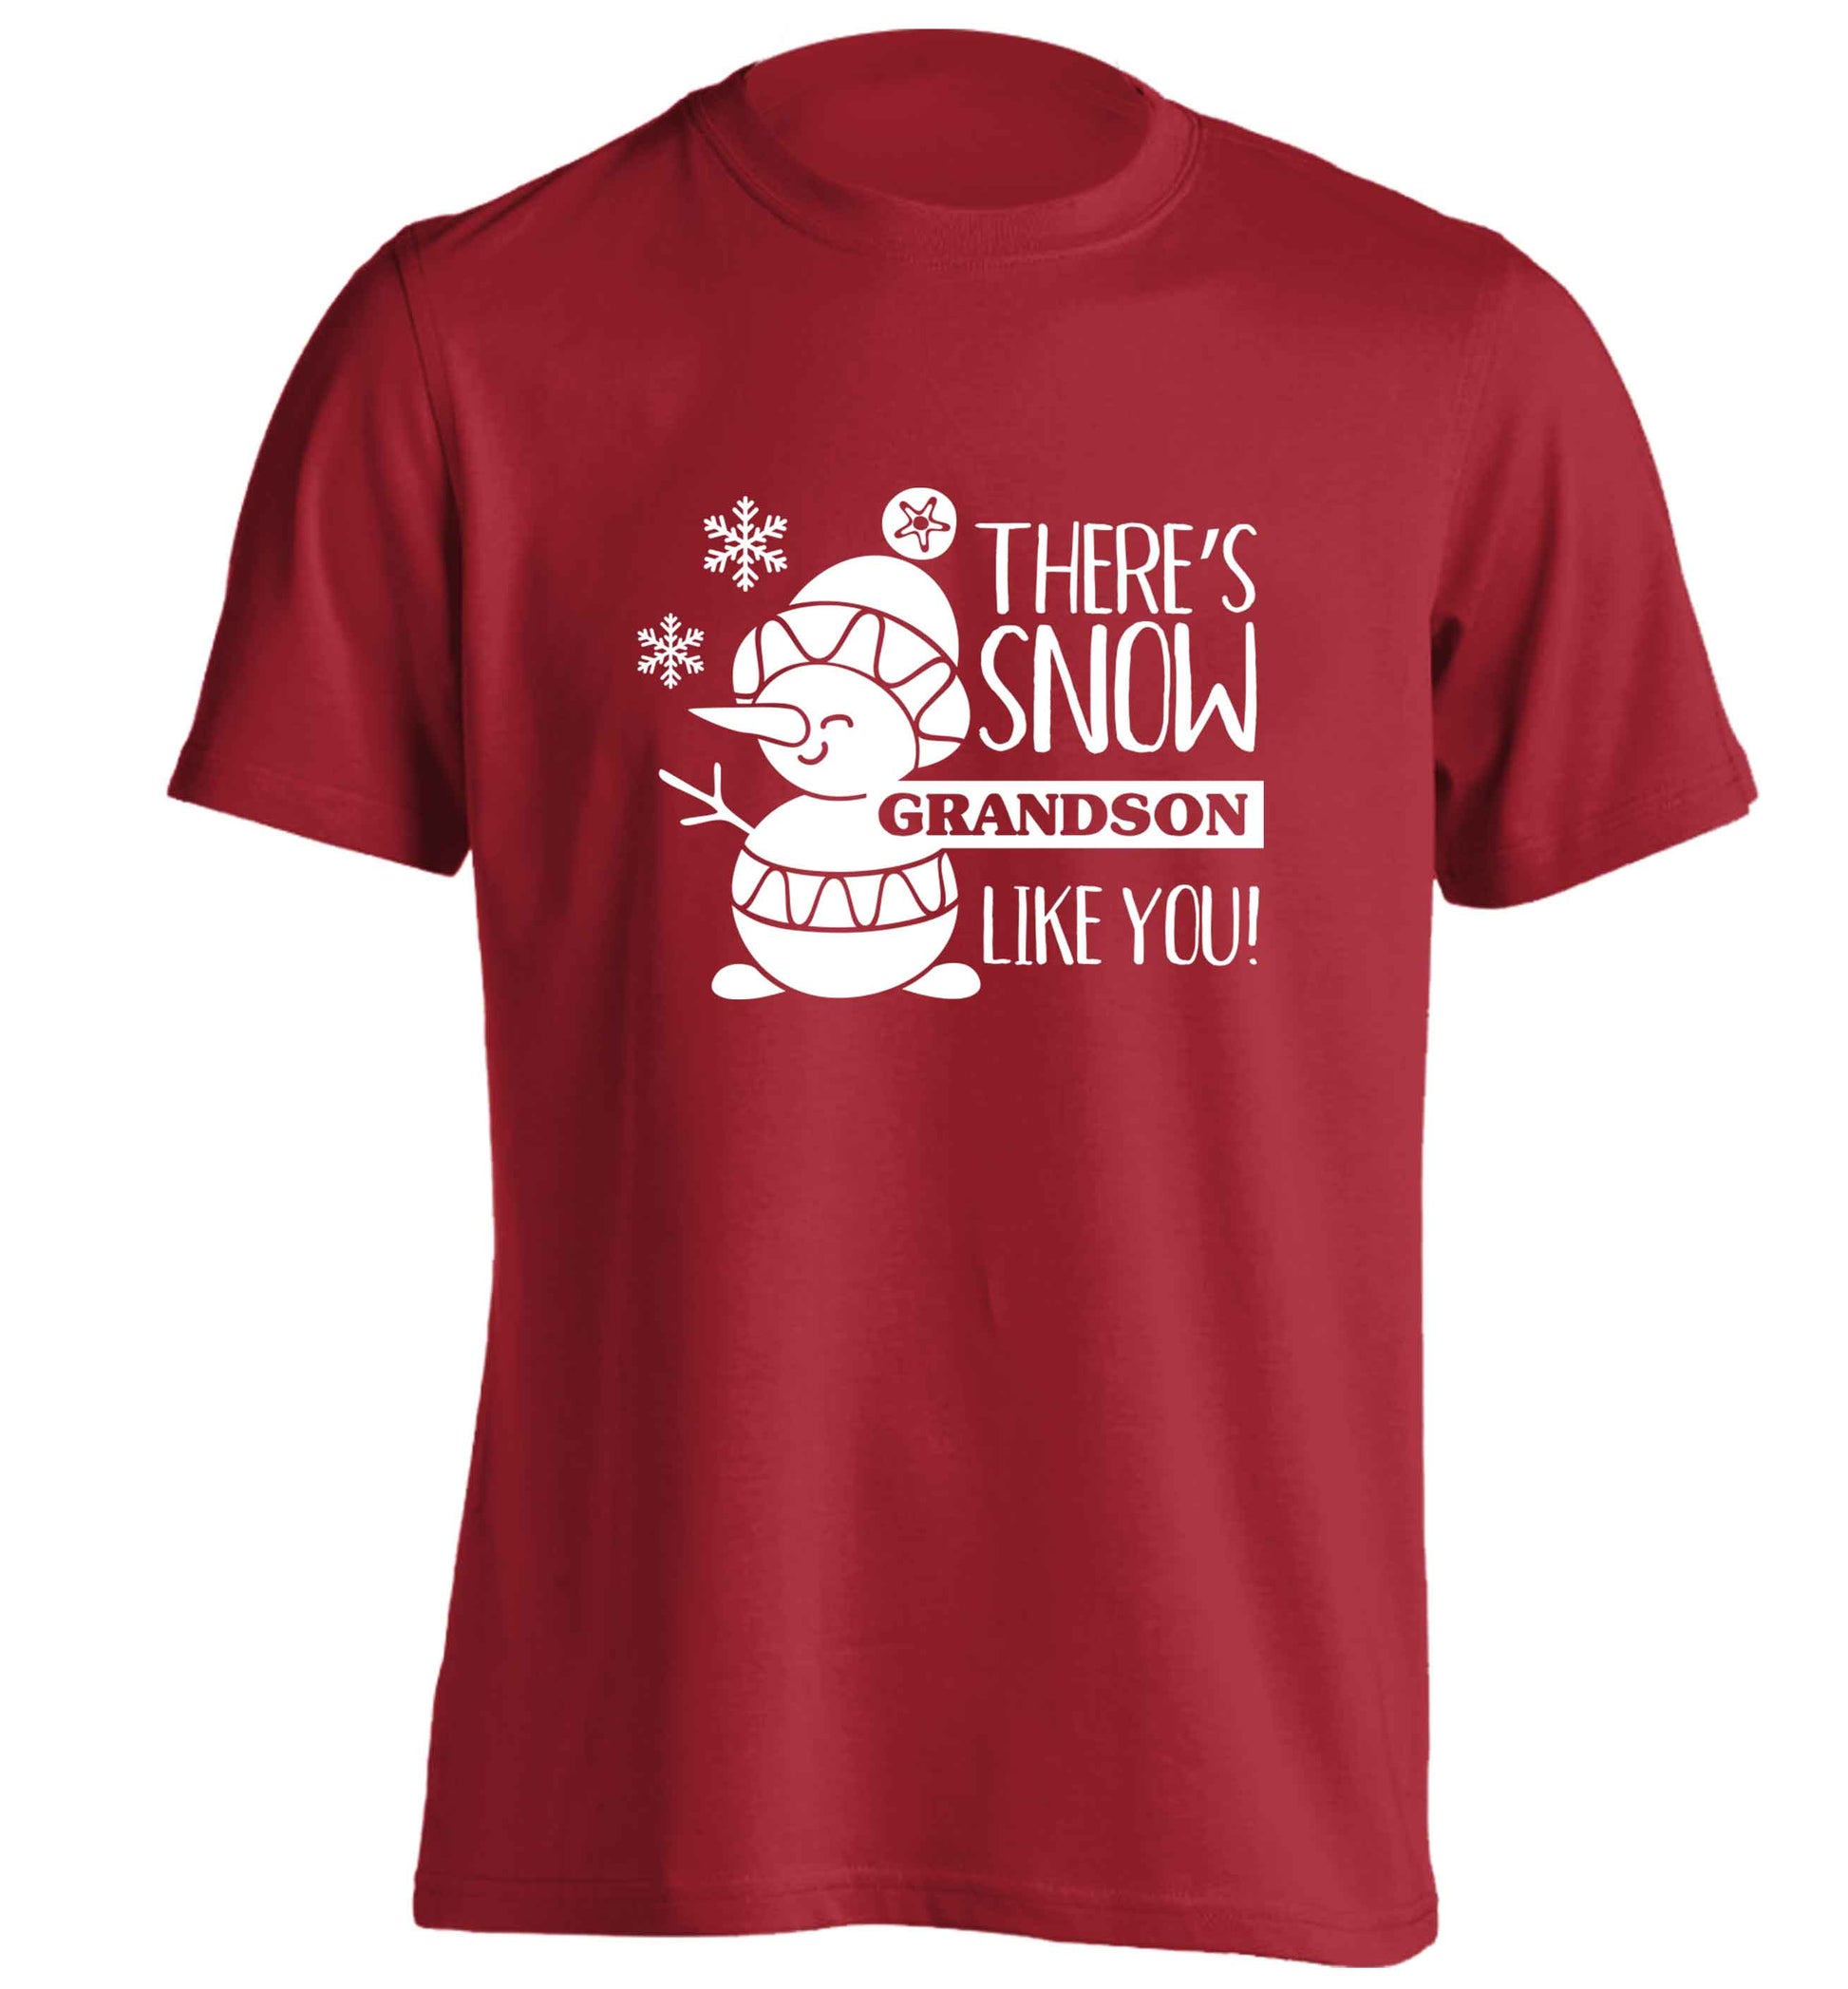 There's snow grandson like you adults unisex red Tshirt 2XL